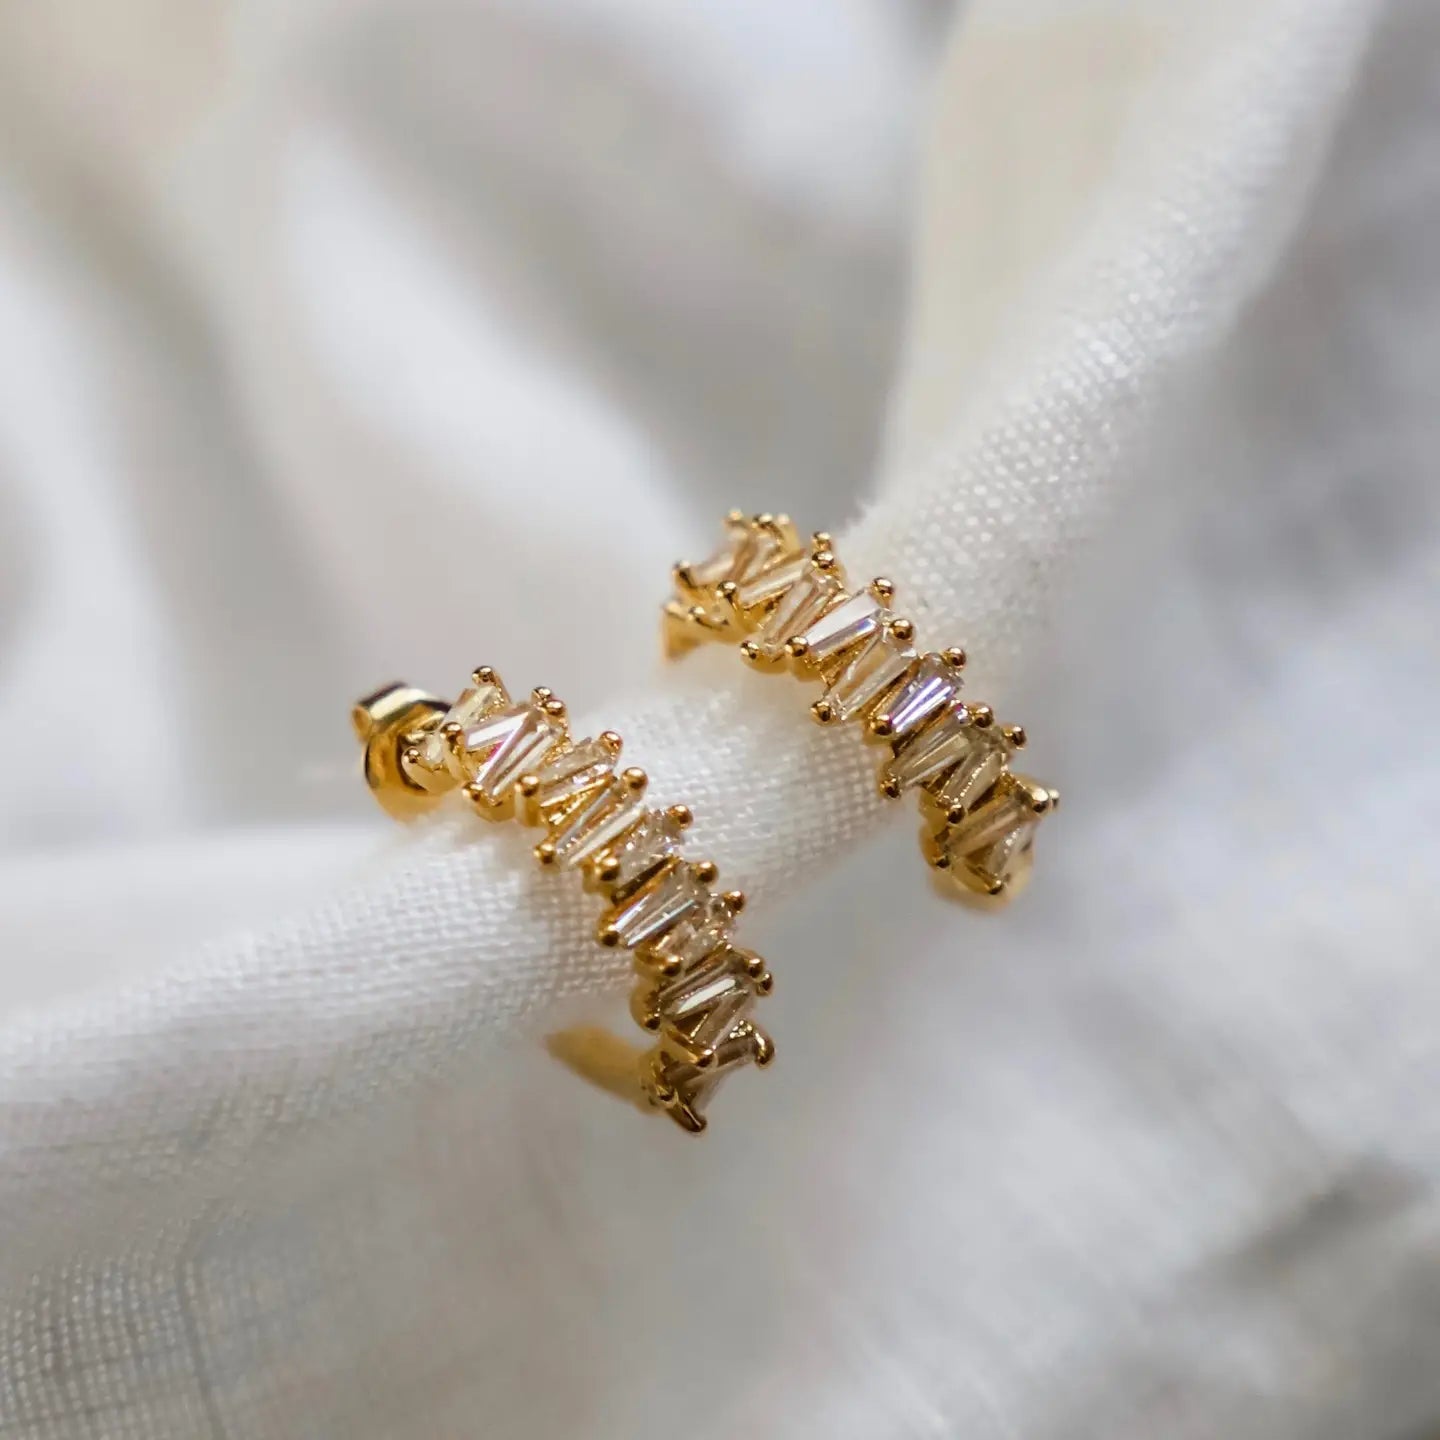 The Gold Tapered Baguette CZ Hoops by Katie Waltman Jewelry